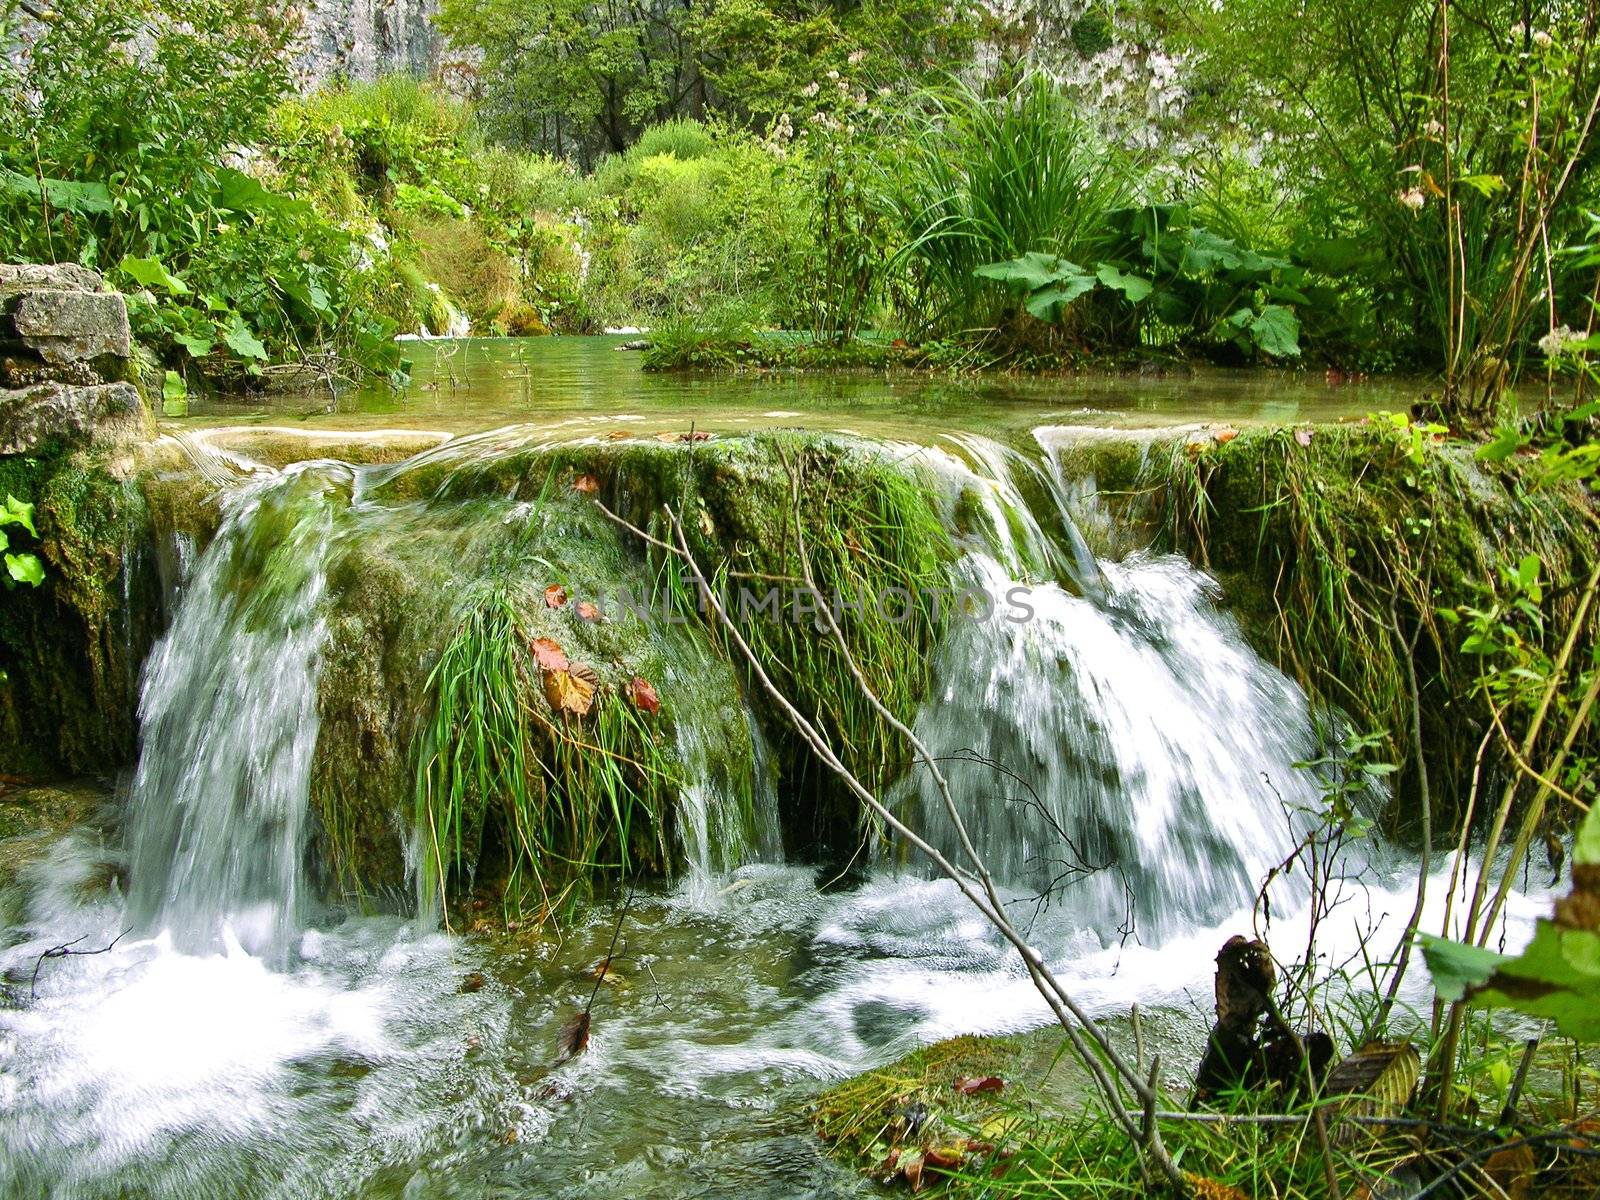 view of waterfalls in "Plitvice lakes" park